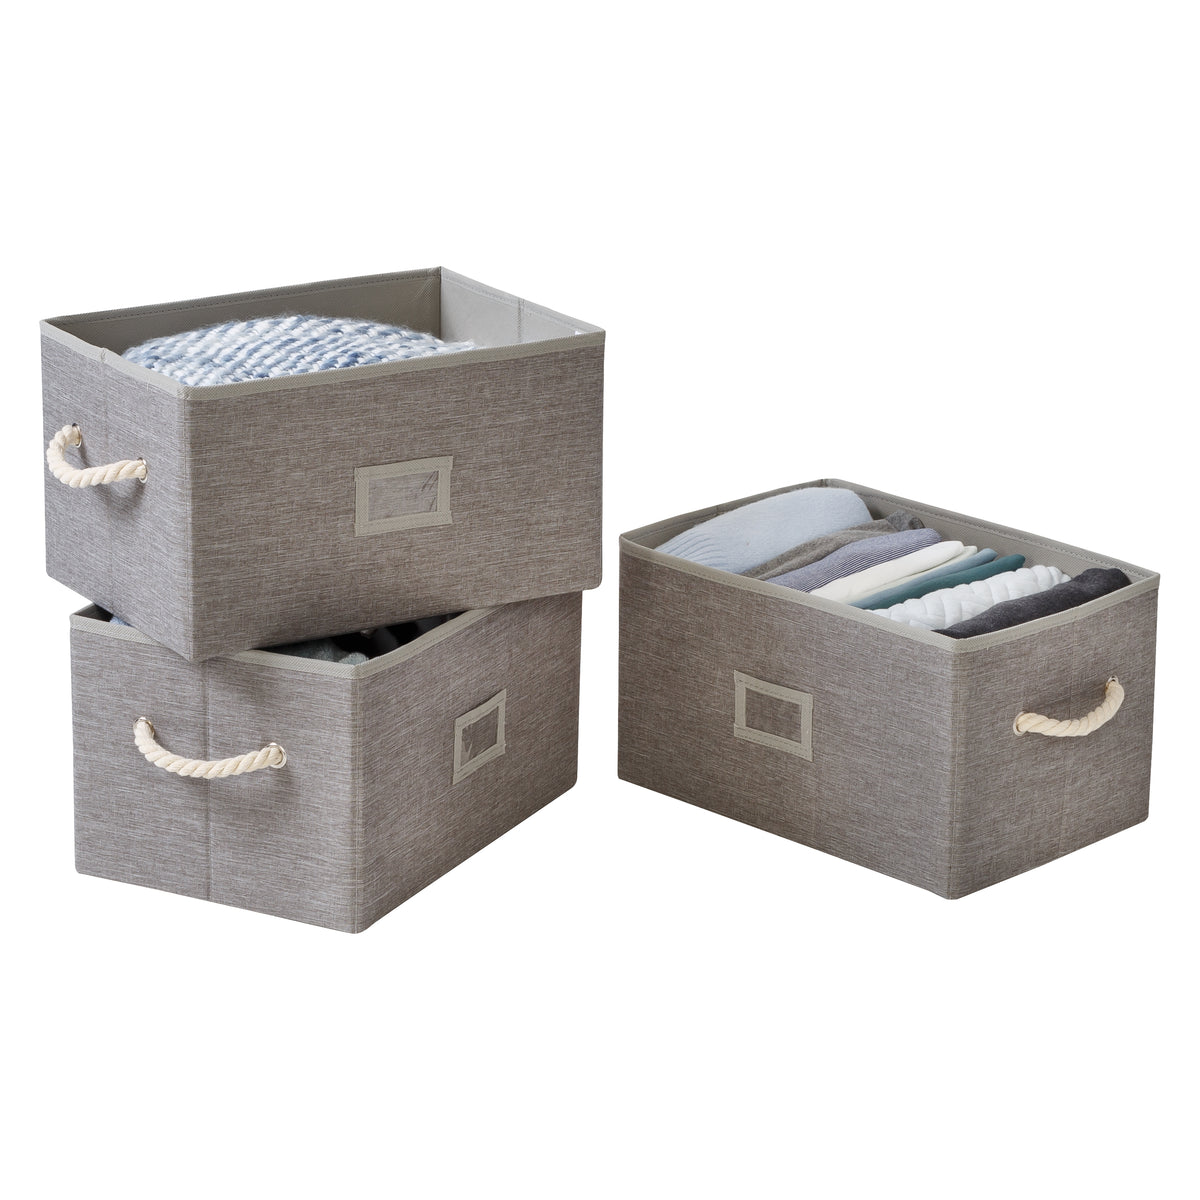 Honey Can Do Set of 3 Collapsible Large Fabric Storage Bins with Handles, Gray Stripes